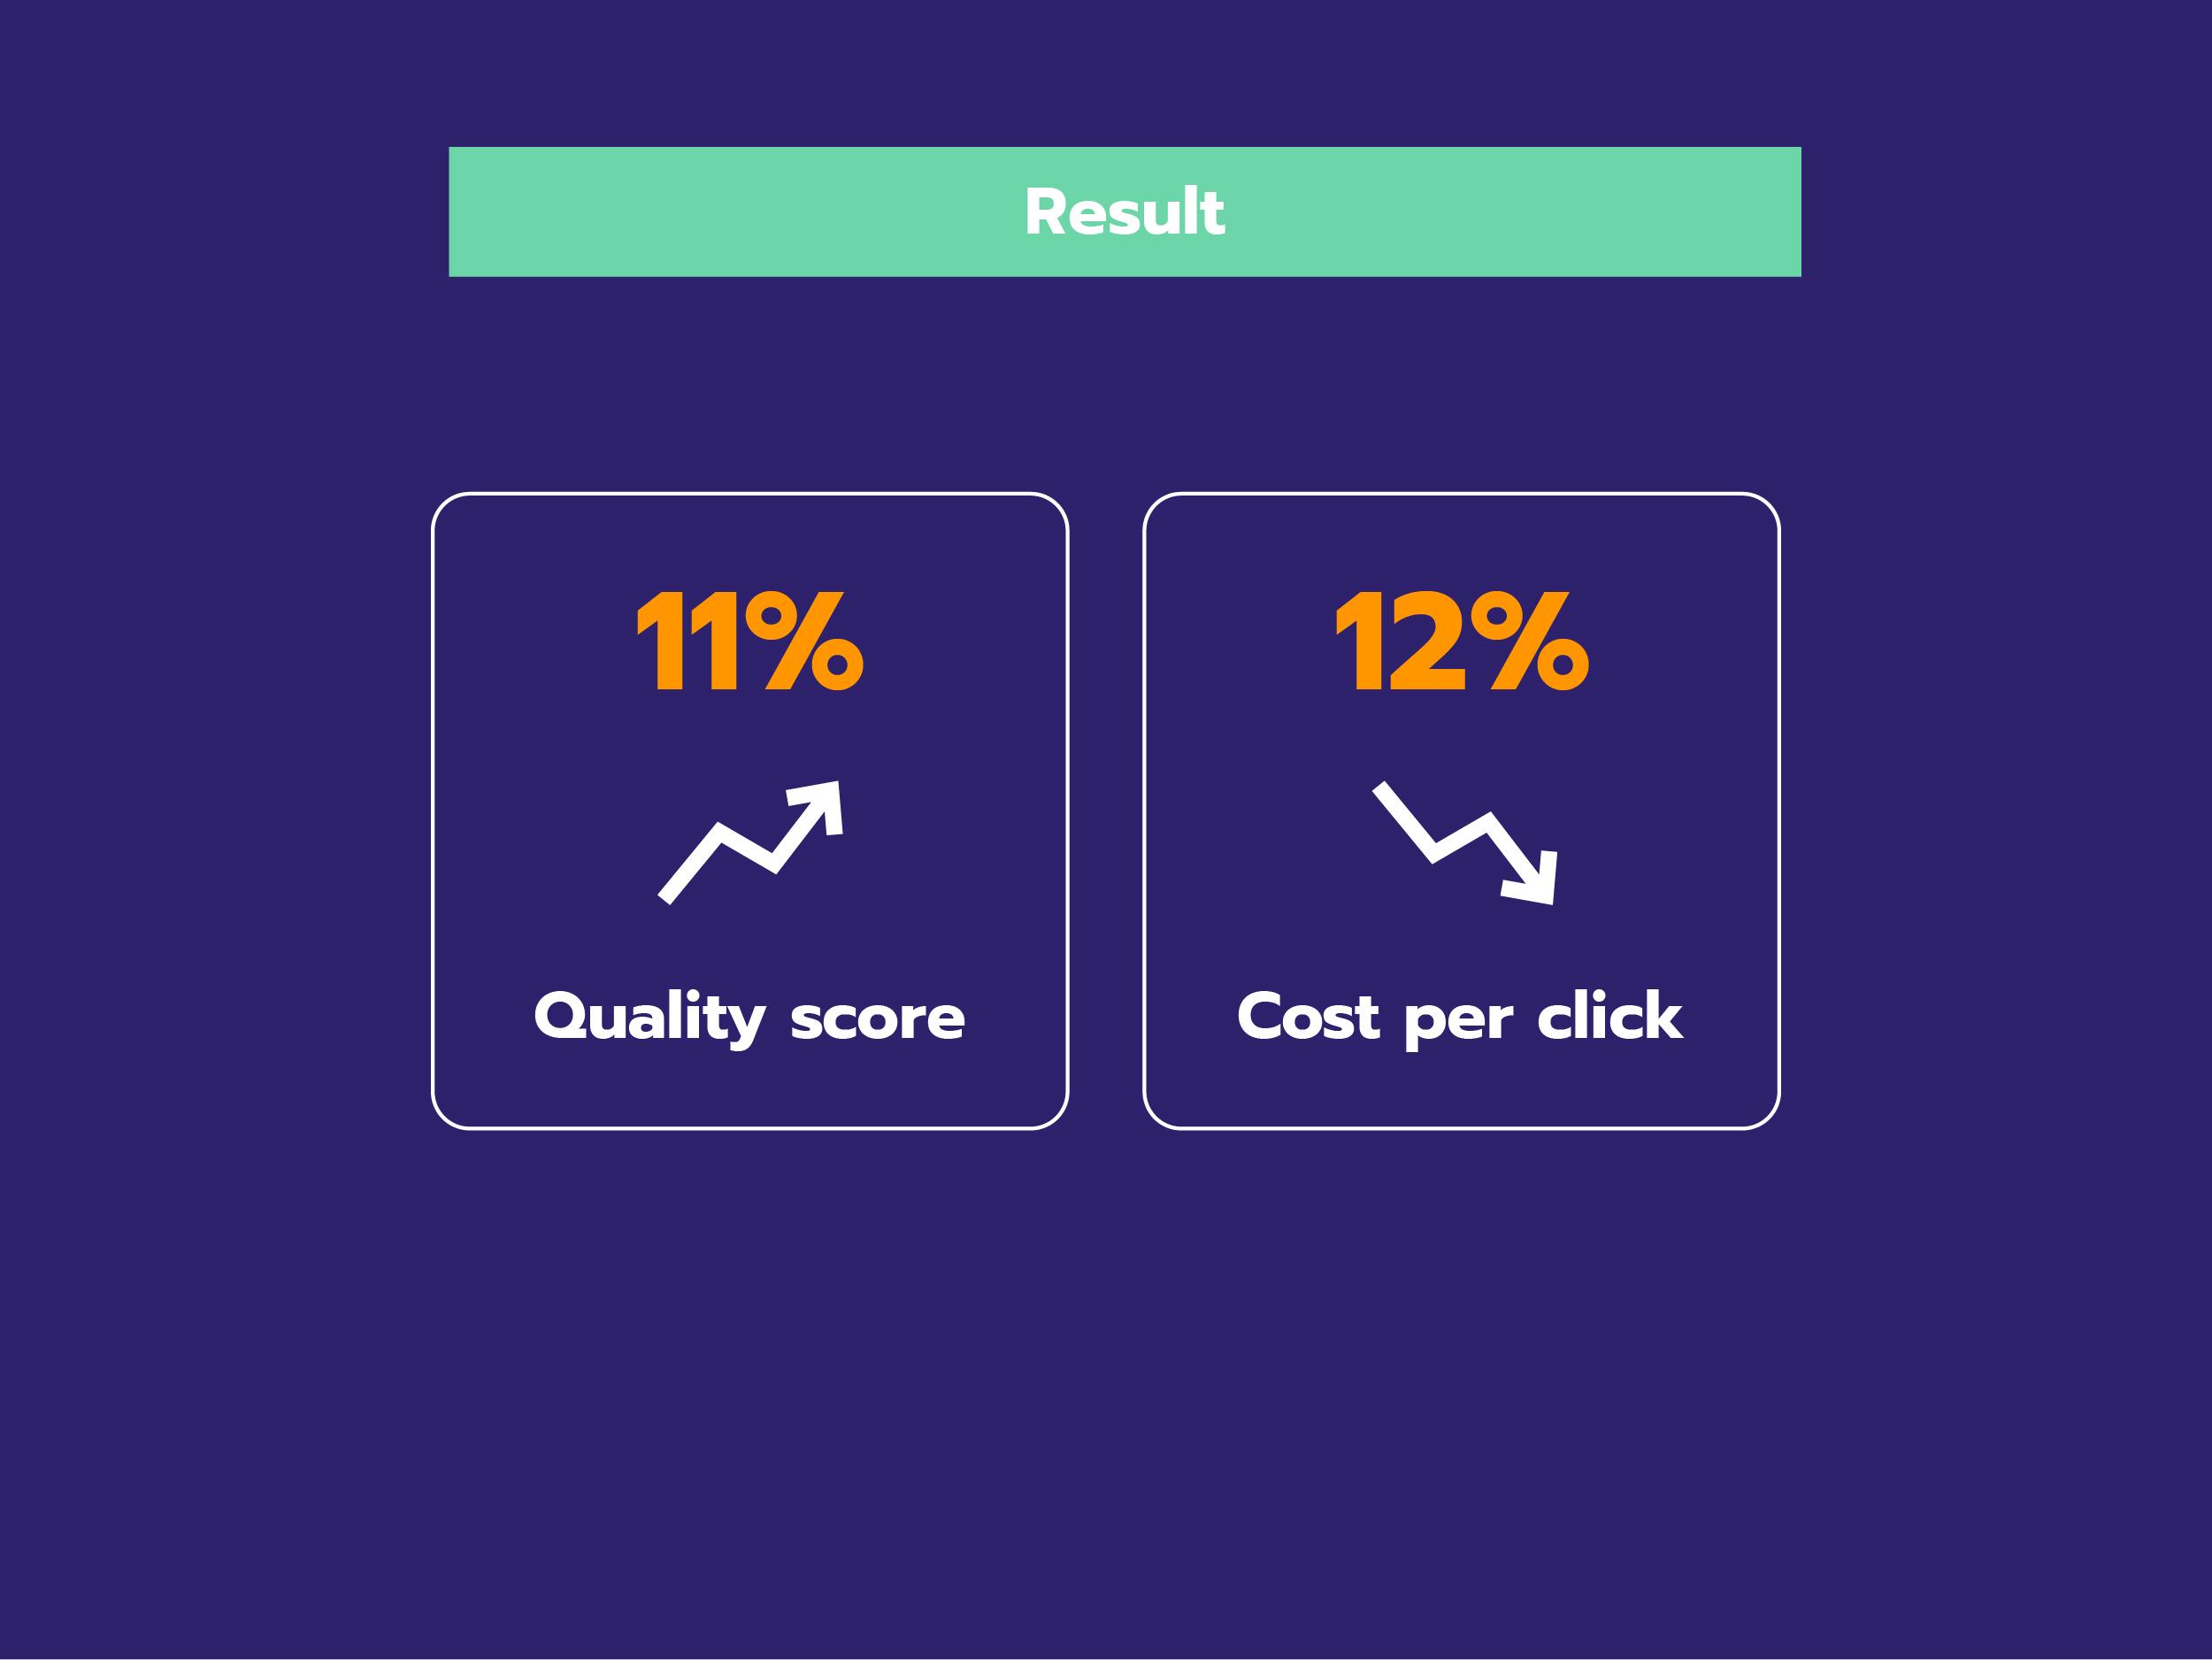 The rise in quality score lowers the cost per click